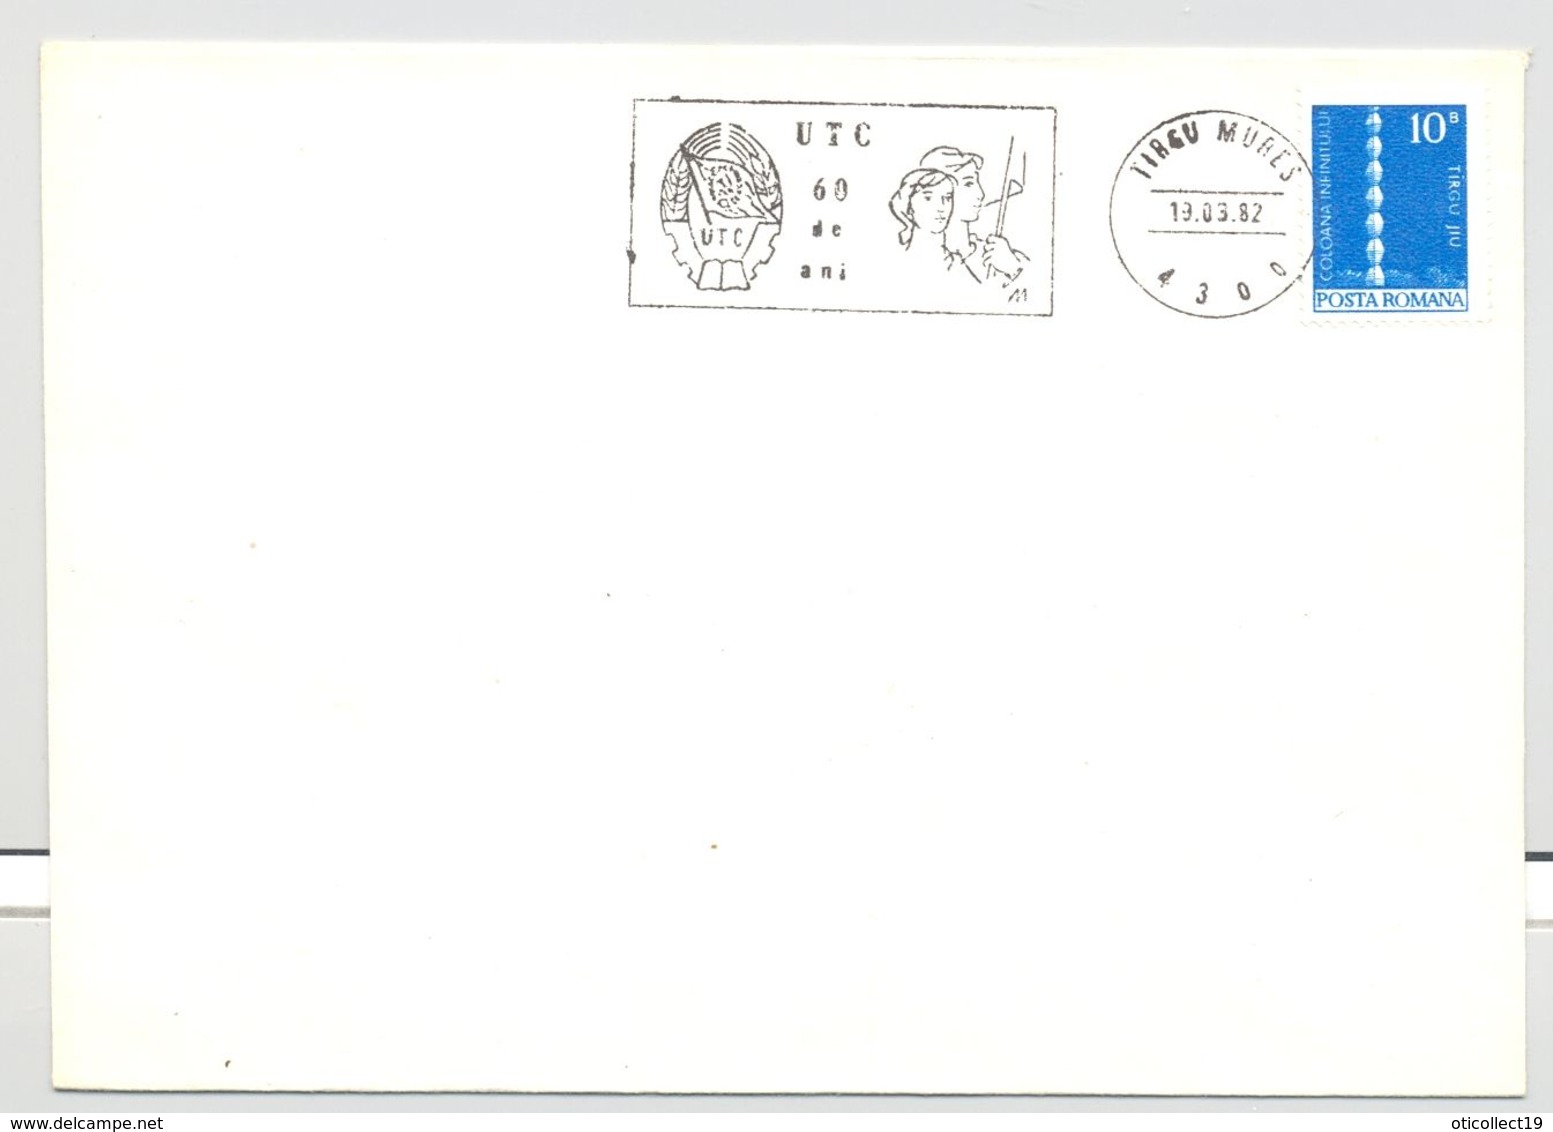 ROMANIAN YOUTH COMMUNIST ORGANIZATION ANNIVERSARY, SPECIAL POSTMARK ON COVER, ENDLESS COLUMN STAMP, 1982, ROMANIA - Storia Postale